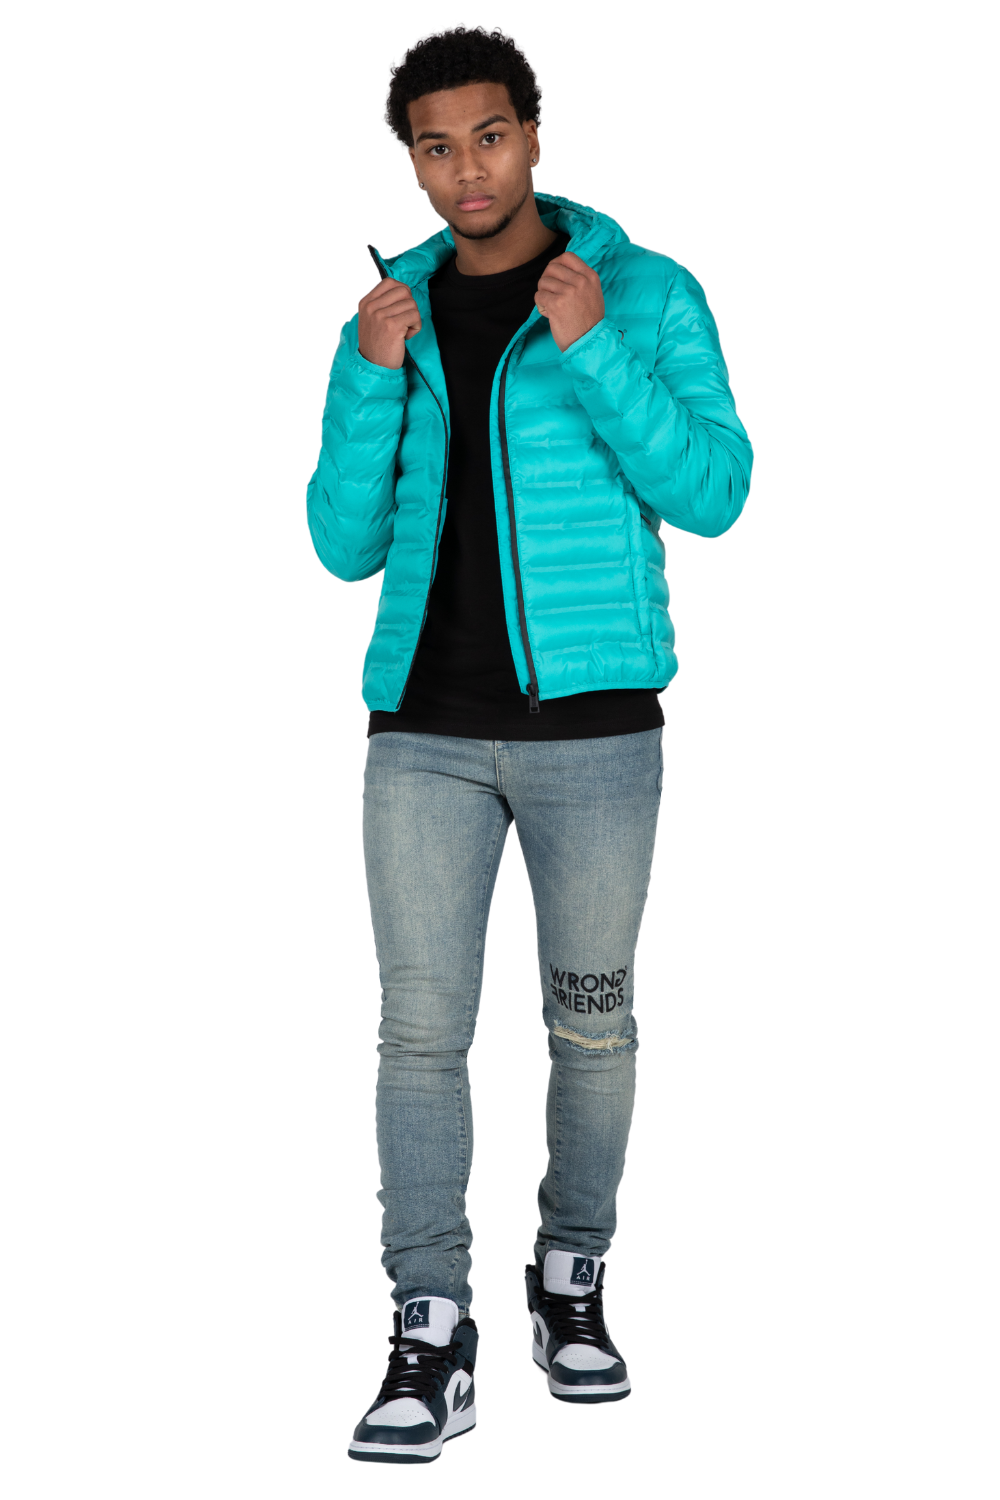 Wrong Friends New York Jacket Turquoise 4